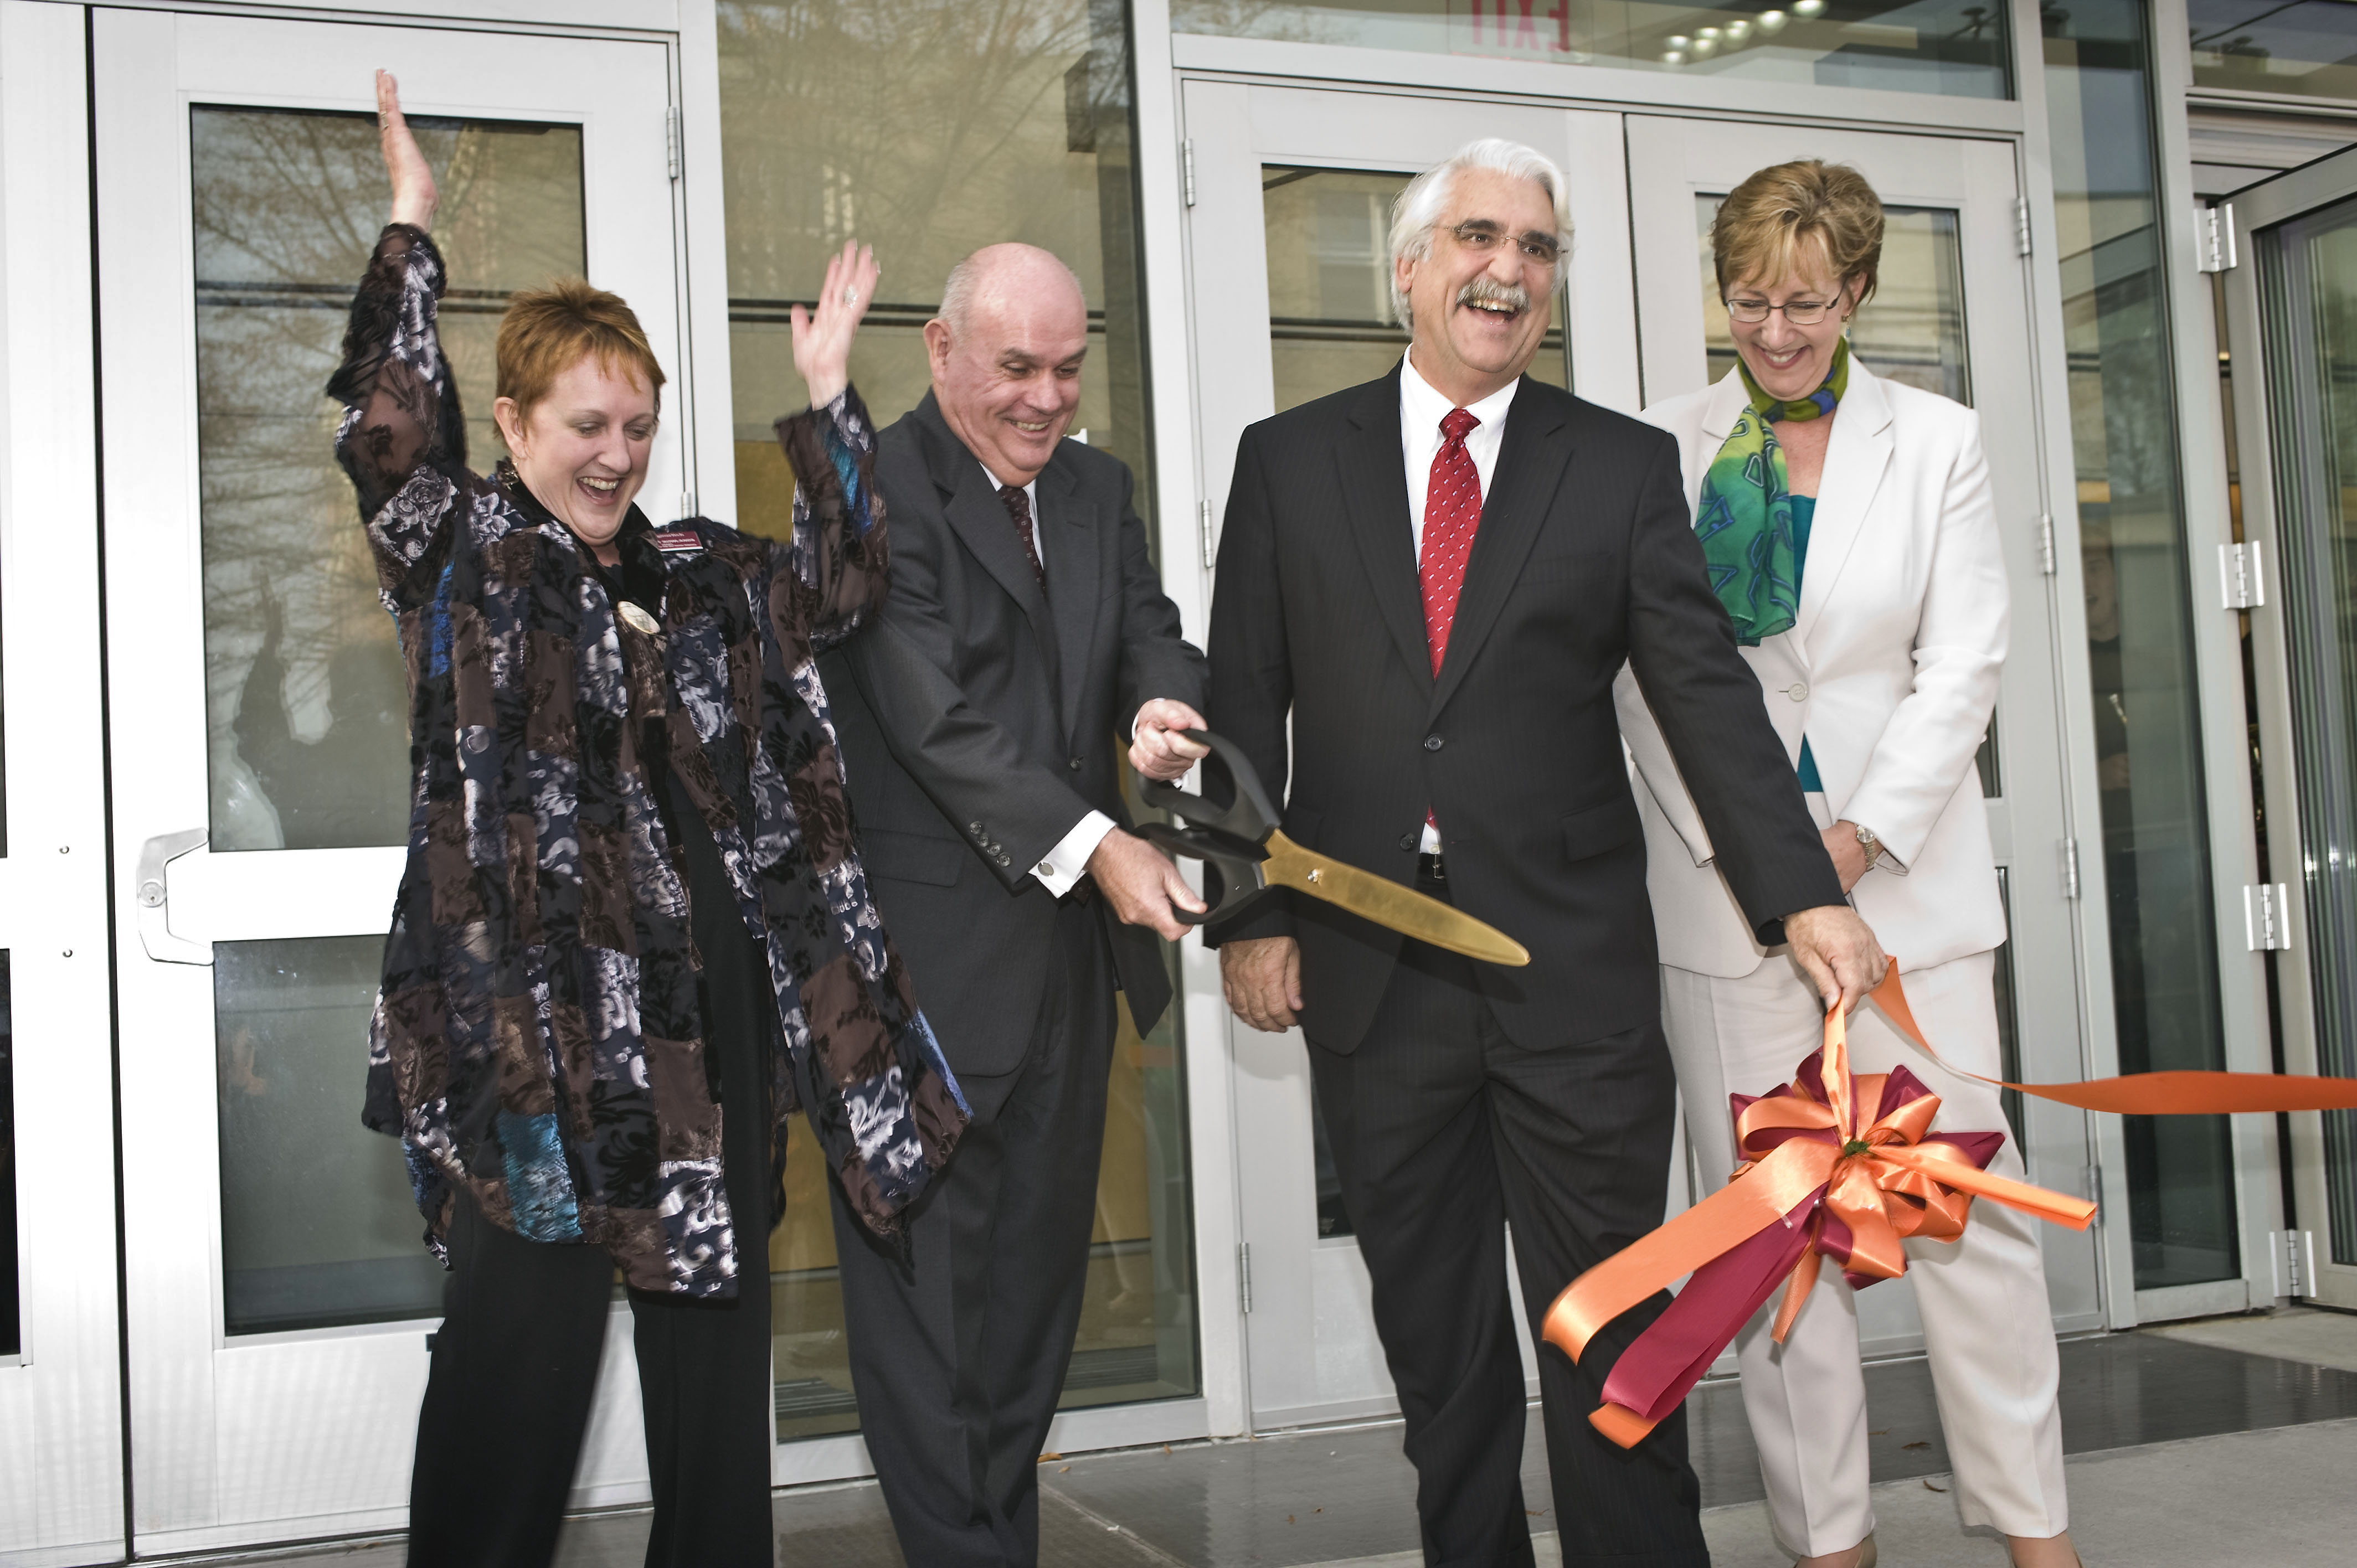 Celebrating the ribbon-cutting of Theatre 101 are (left to right) Sue Ott Rowlands, dean of the College of Liberal Arts and Human Sciences; Virginia Tech Provost and Senior Vice President Mark McNamee; Blacksburg Mayor Ron Rordam; and Patty Raun, department head of Theatre and Cinema.